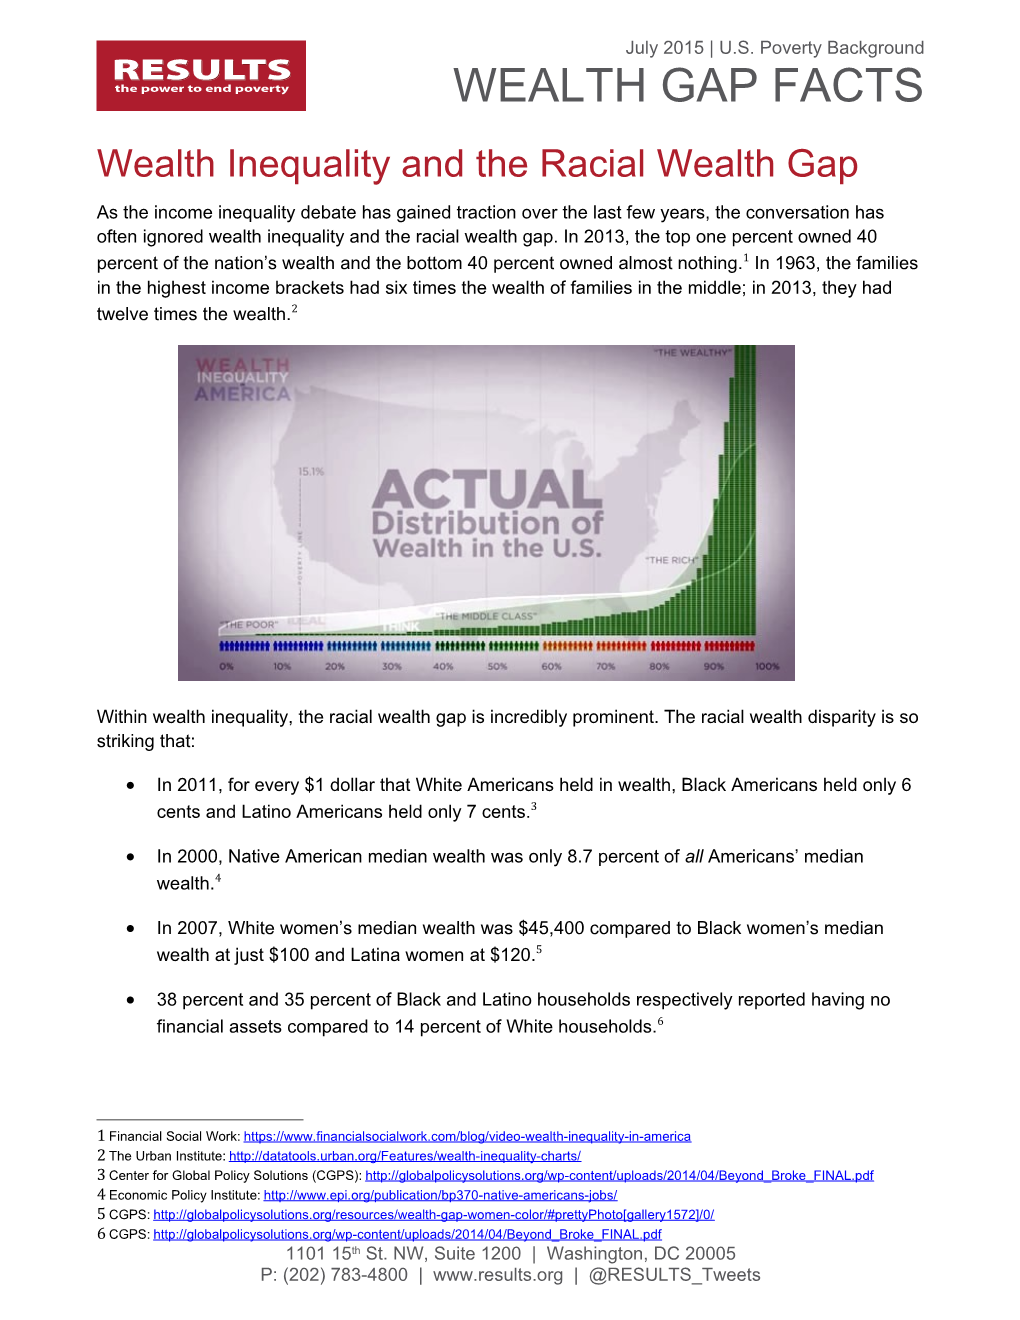 Wealth Inequality and the Racial Wealth Gap